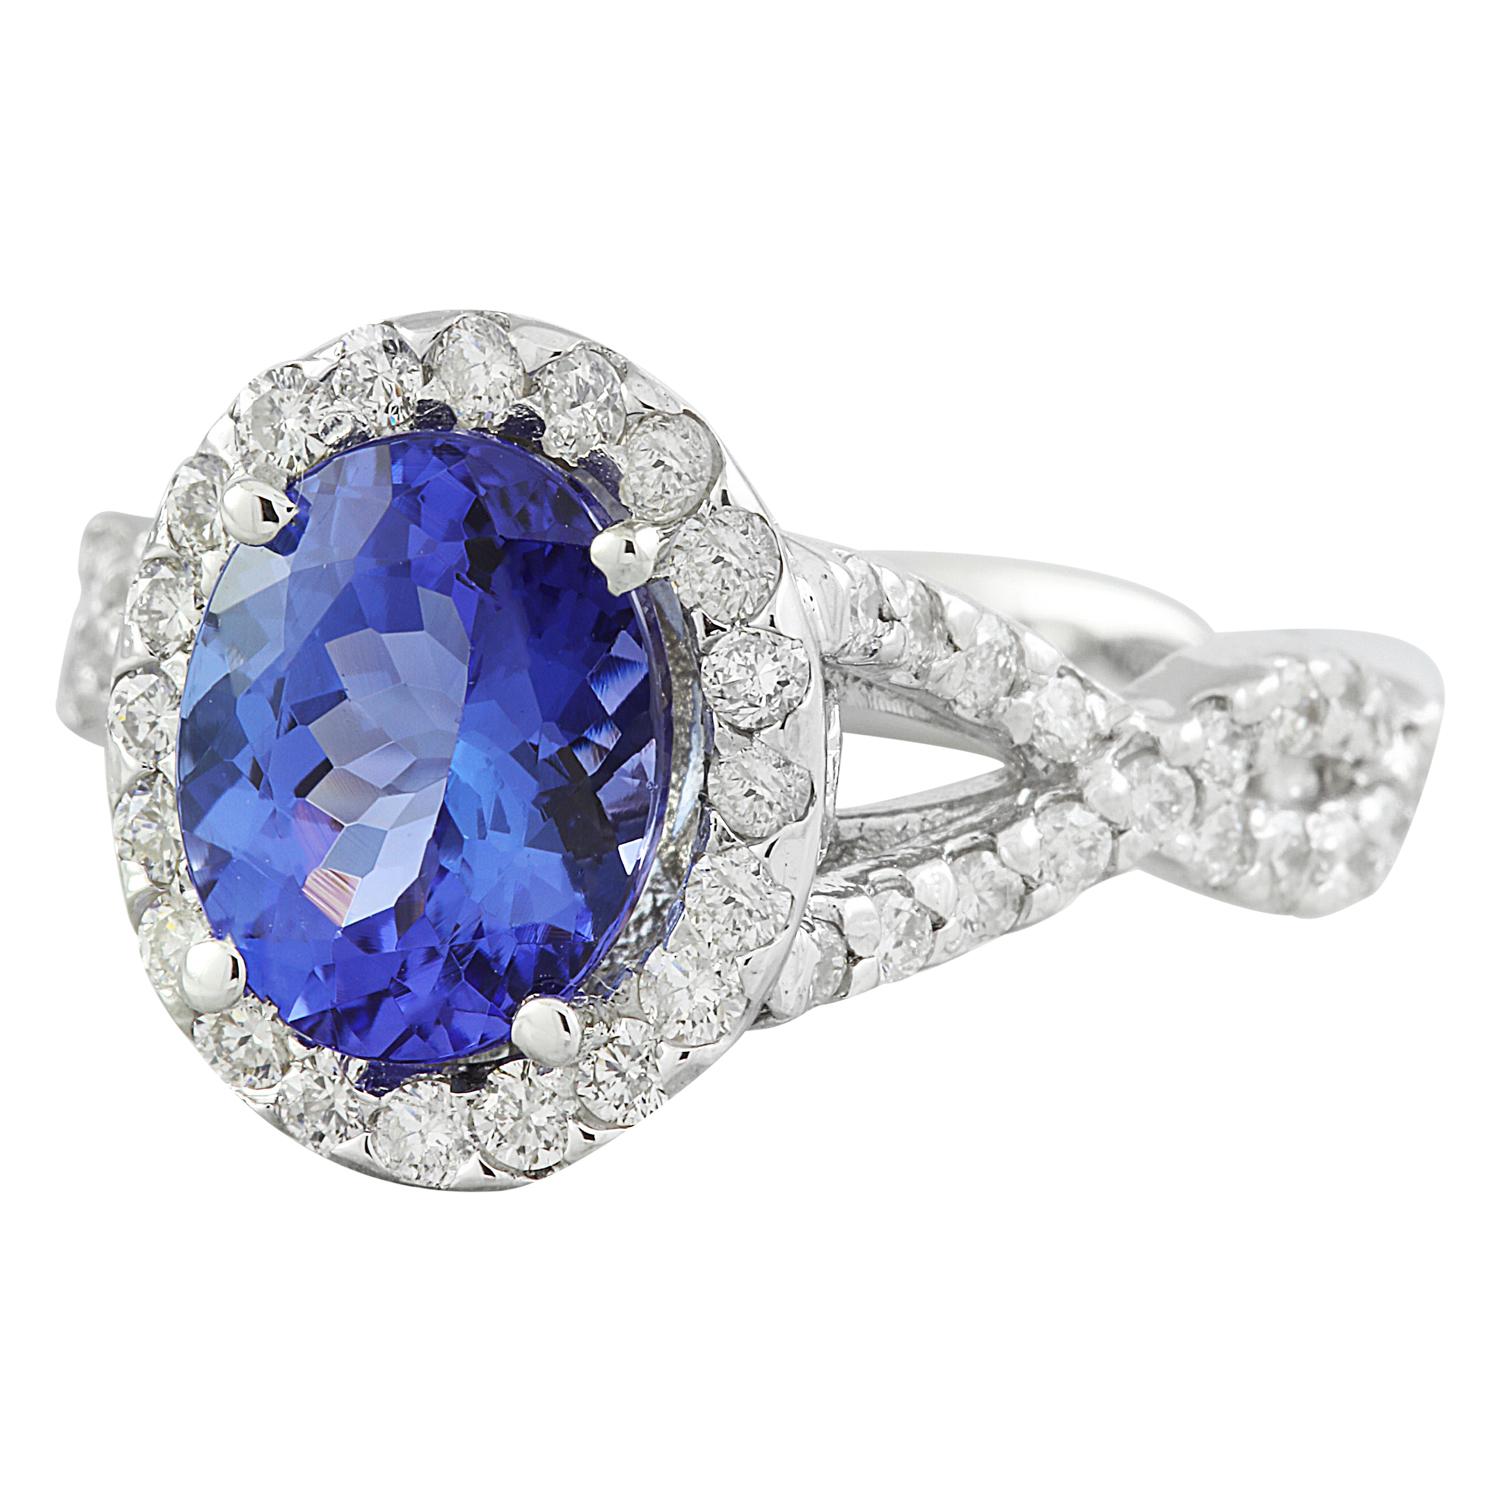 Oval Cut Exquisite Natural Tanzanite Diamond Ring in 14K White Gold For Sale